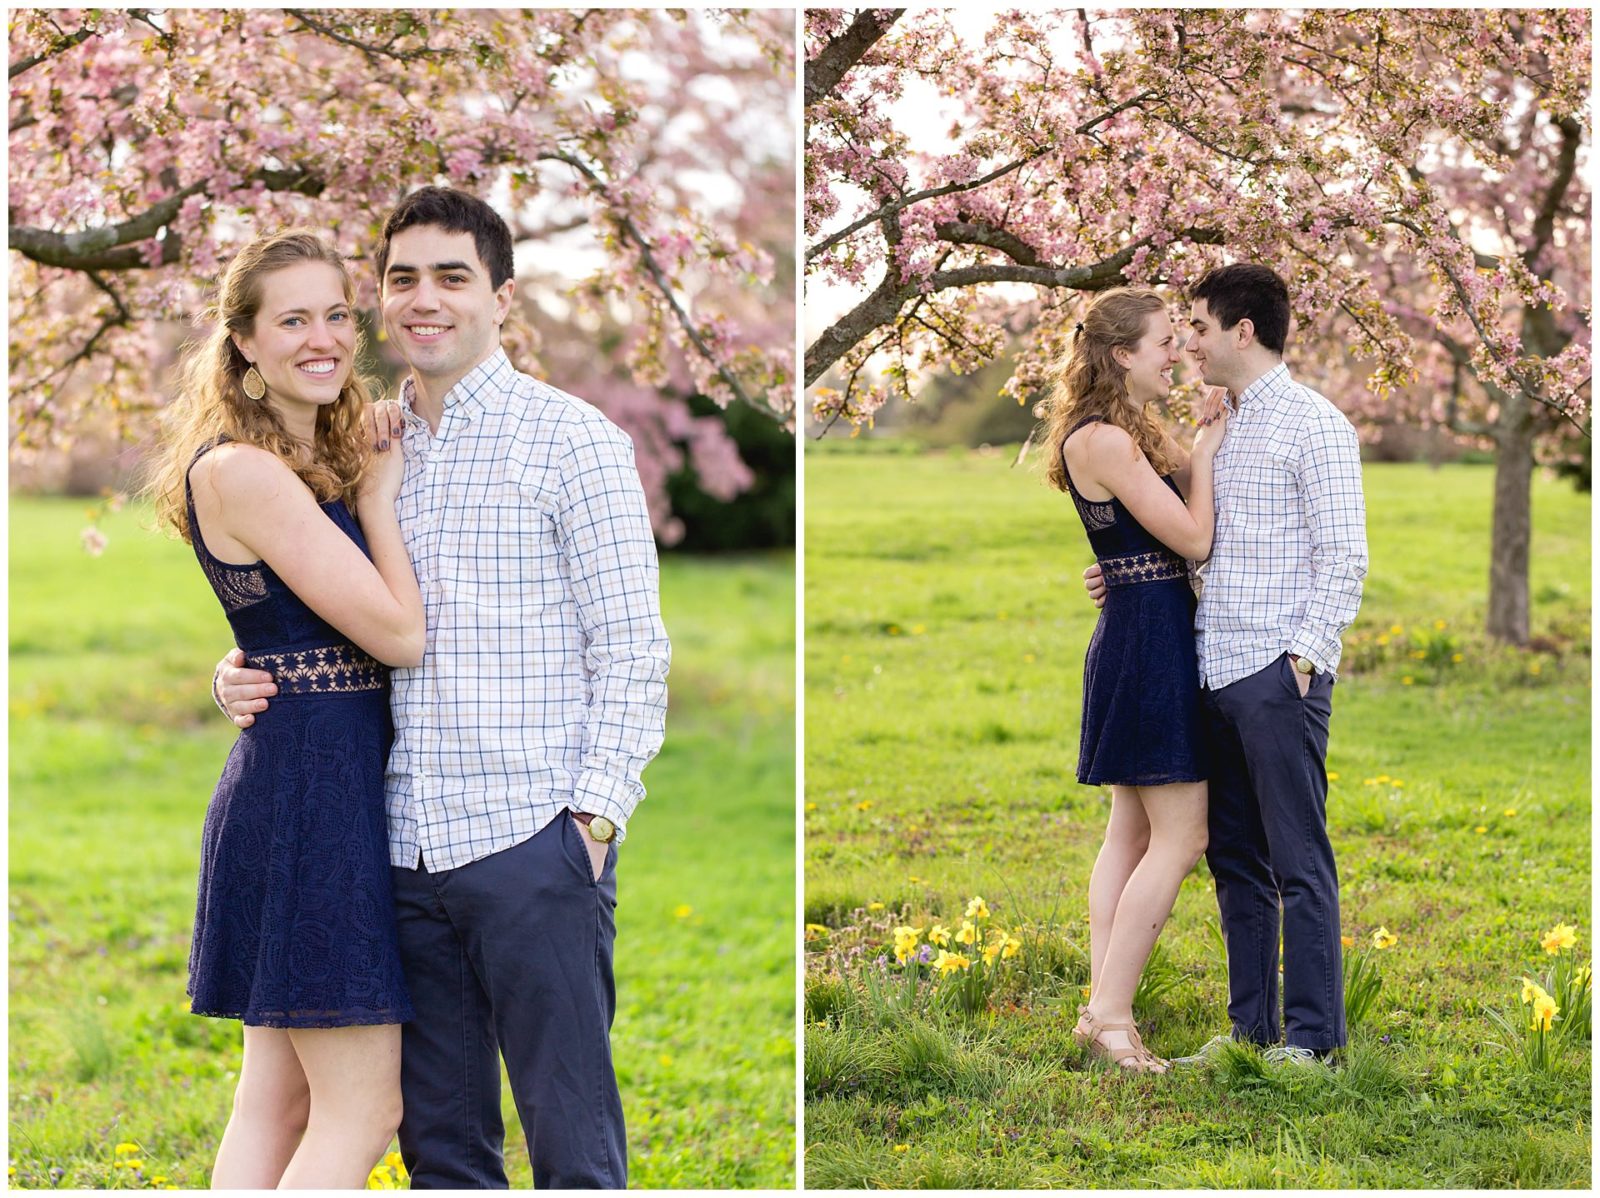 Spring engagement session at the Arboretum in Lexington, KY